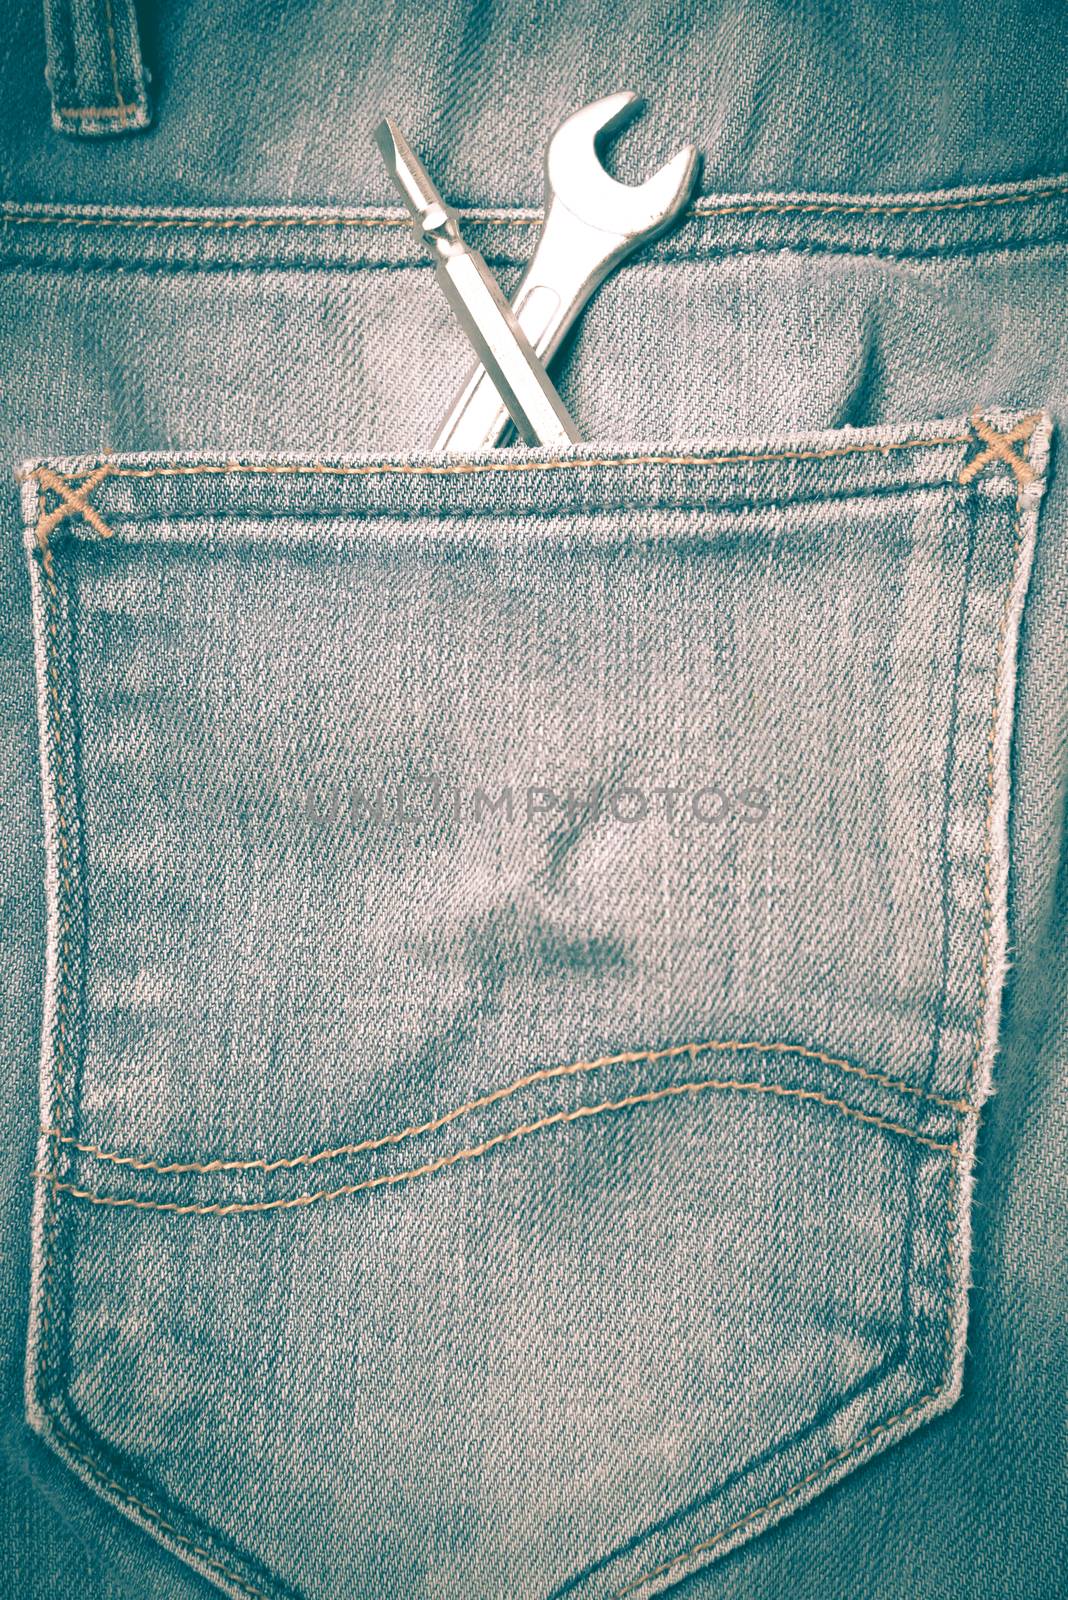 wrench tools in jean pants retro vintage style